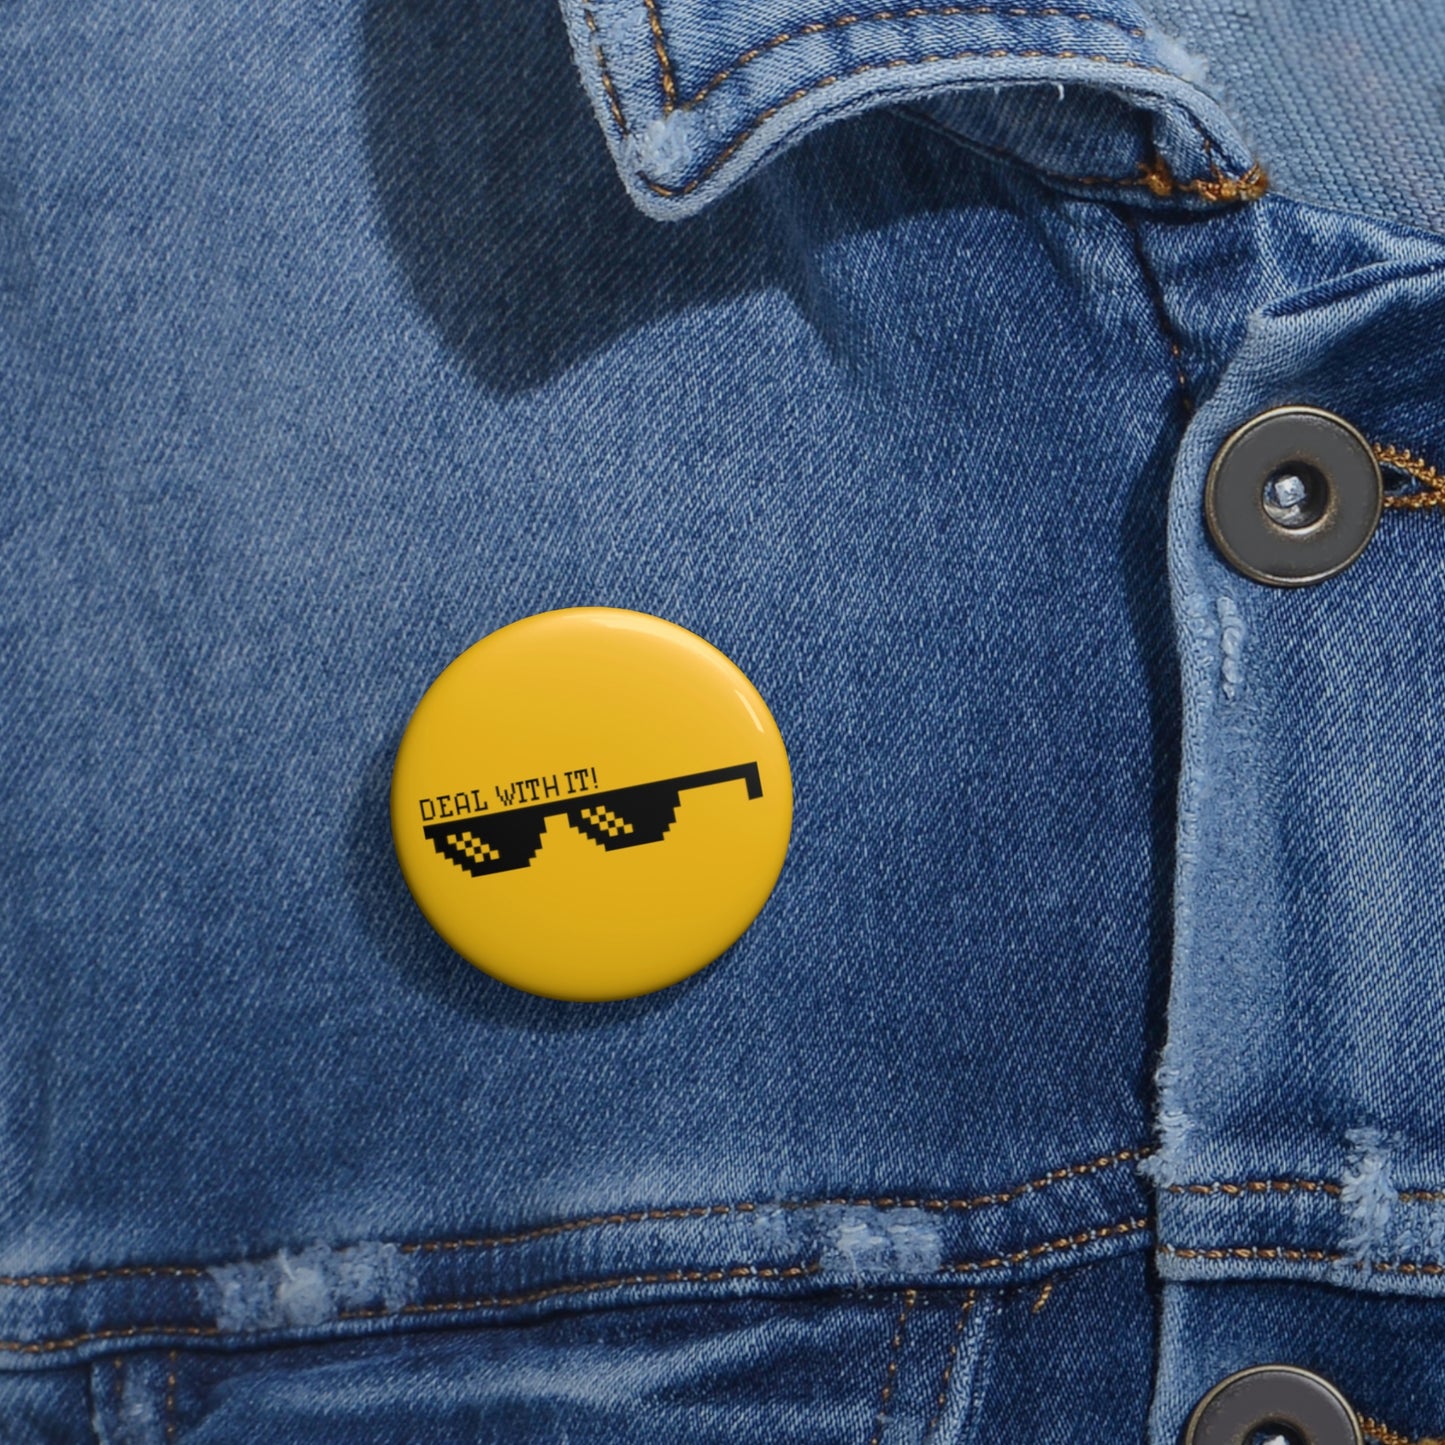 Deal With It Custom Pin Buttons